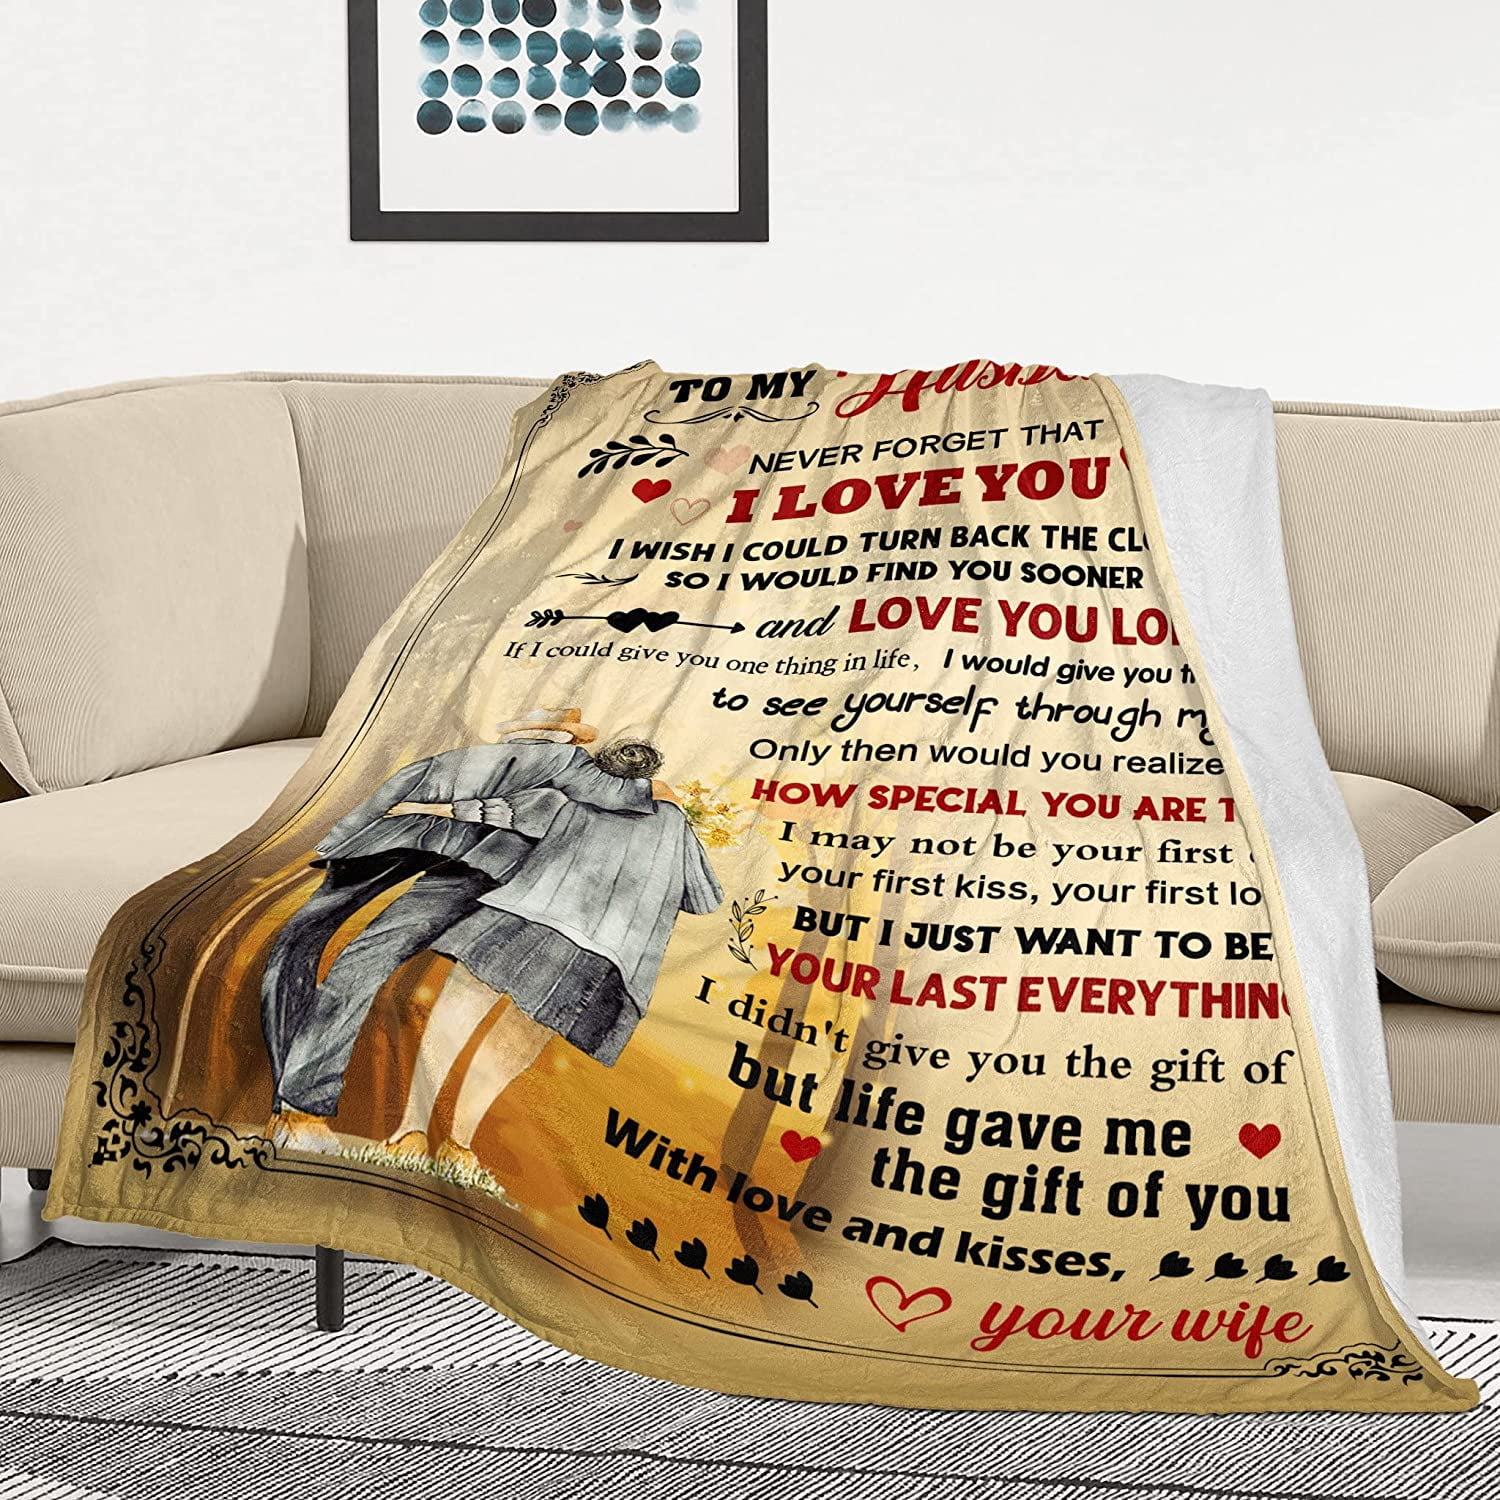 Wisegem Gifts for Girlfriend 60x50 Blanket - Birthday Gift from Boyfriend  - Romantic Gifts for Her - Valentine's Day for Her - Girlfriend